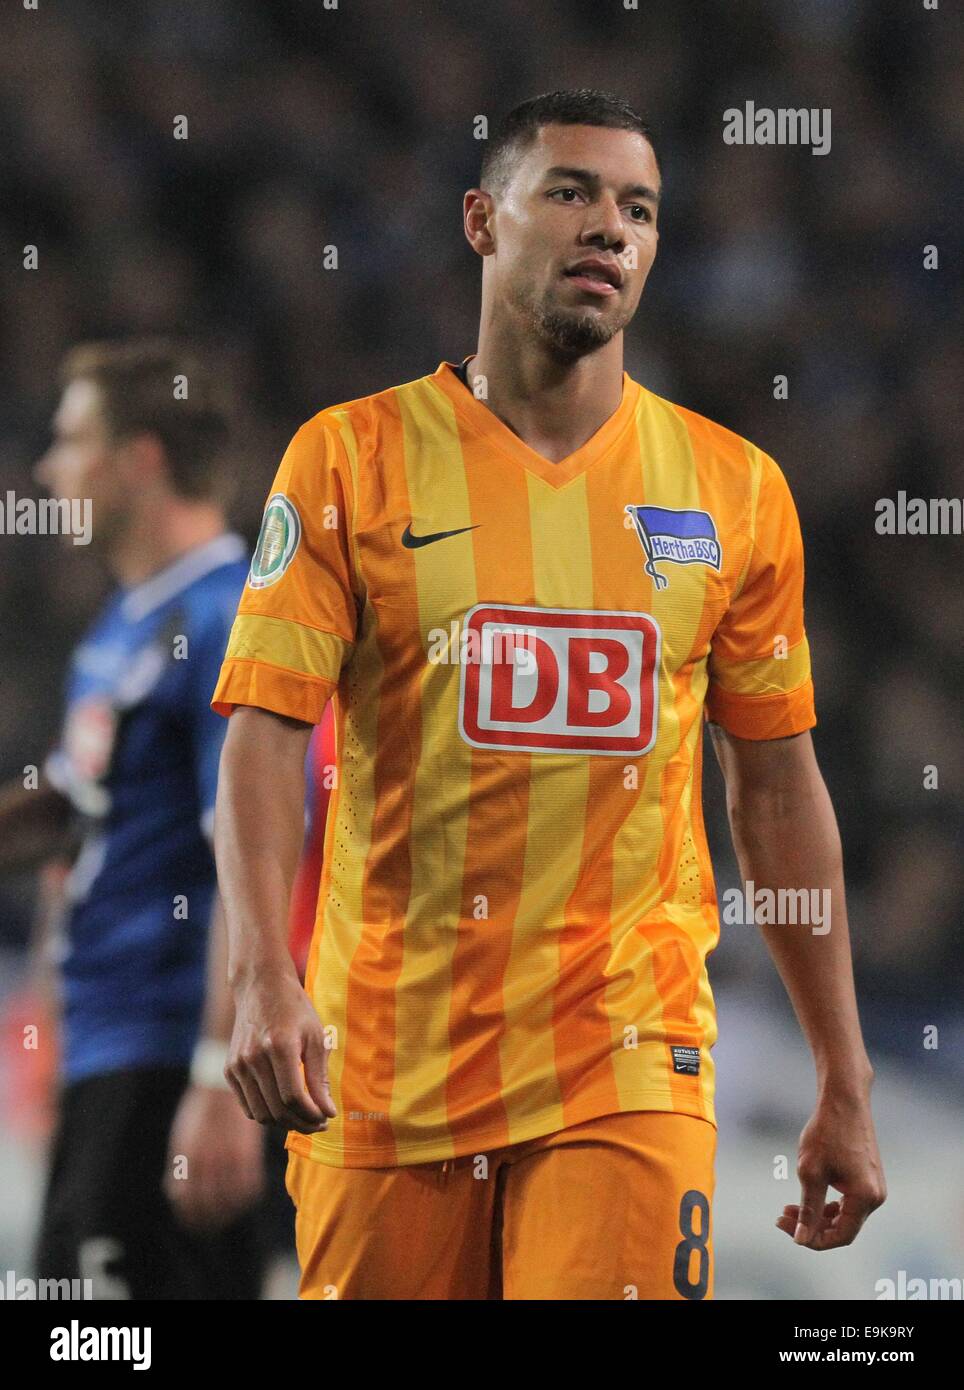 Bielefeld, Germany. 28th Oct, 2014. Berlin's Marcel Ndjeng during the German DFB-Cup match between Arminia Bielefeld and Hertha BSC at the Schueco Arena in Bielefeld, Germany, 28 October 2014. Credit:  dpa picture alliance/Alamy Live News Stock Photo